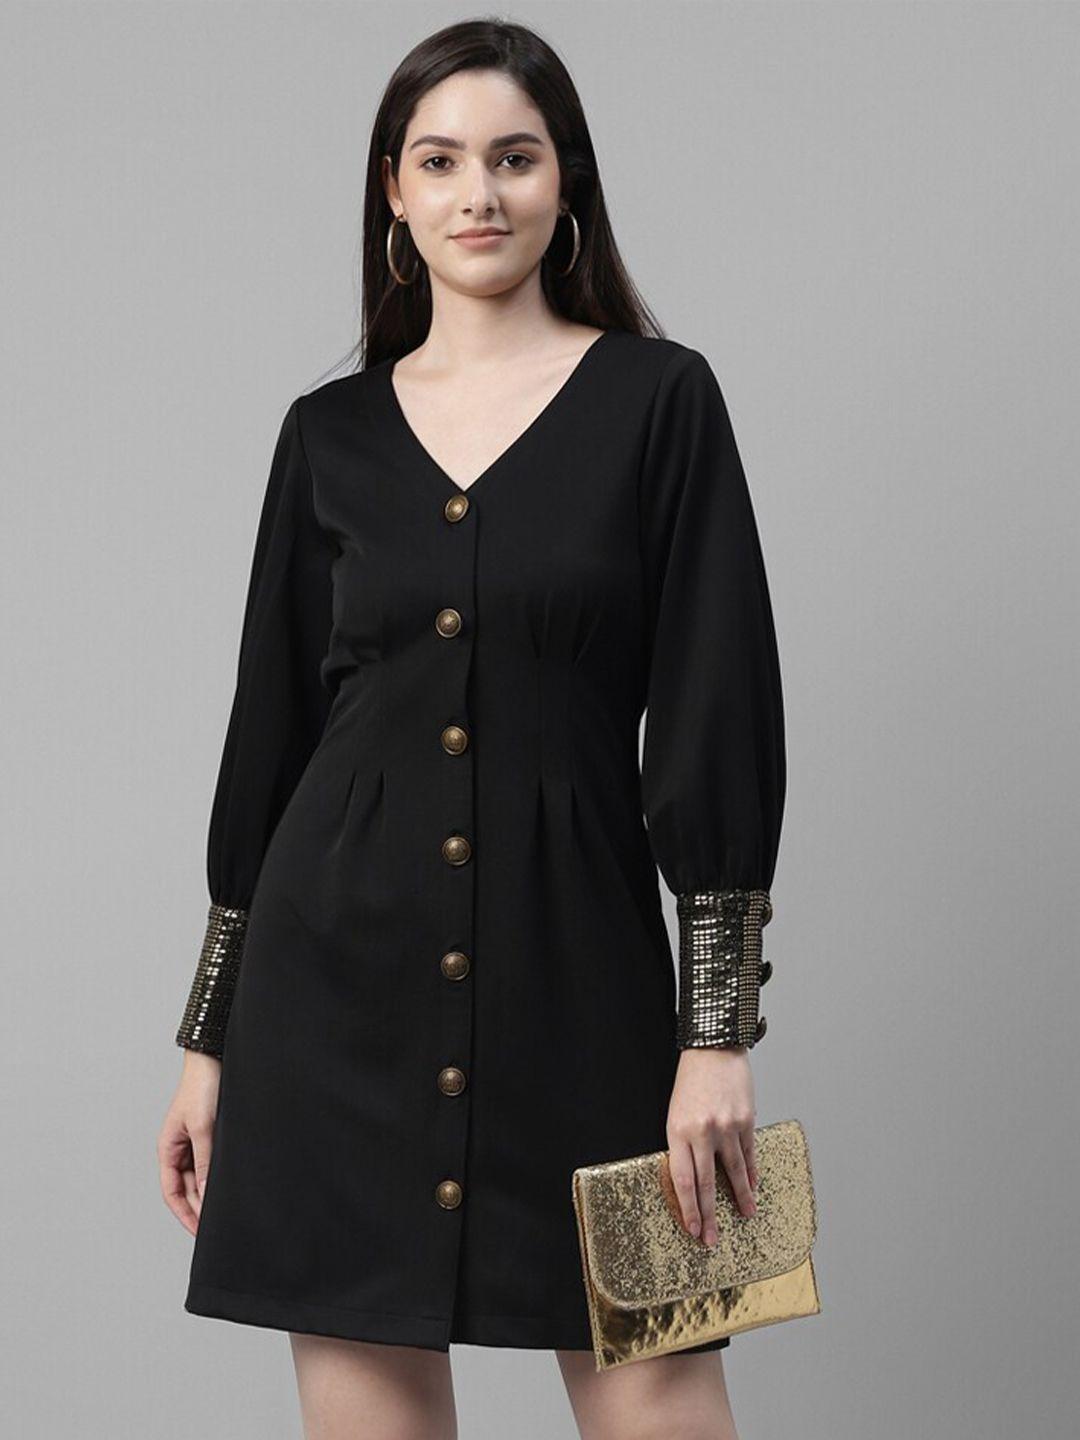 taurus v-neck cuffed sleeves embellished detailed a-line dress